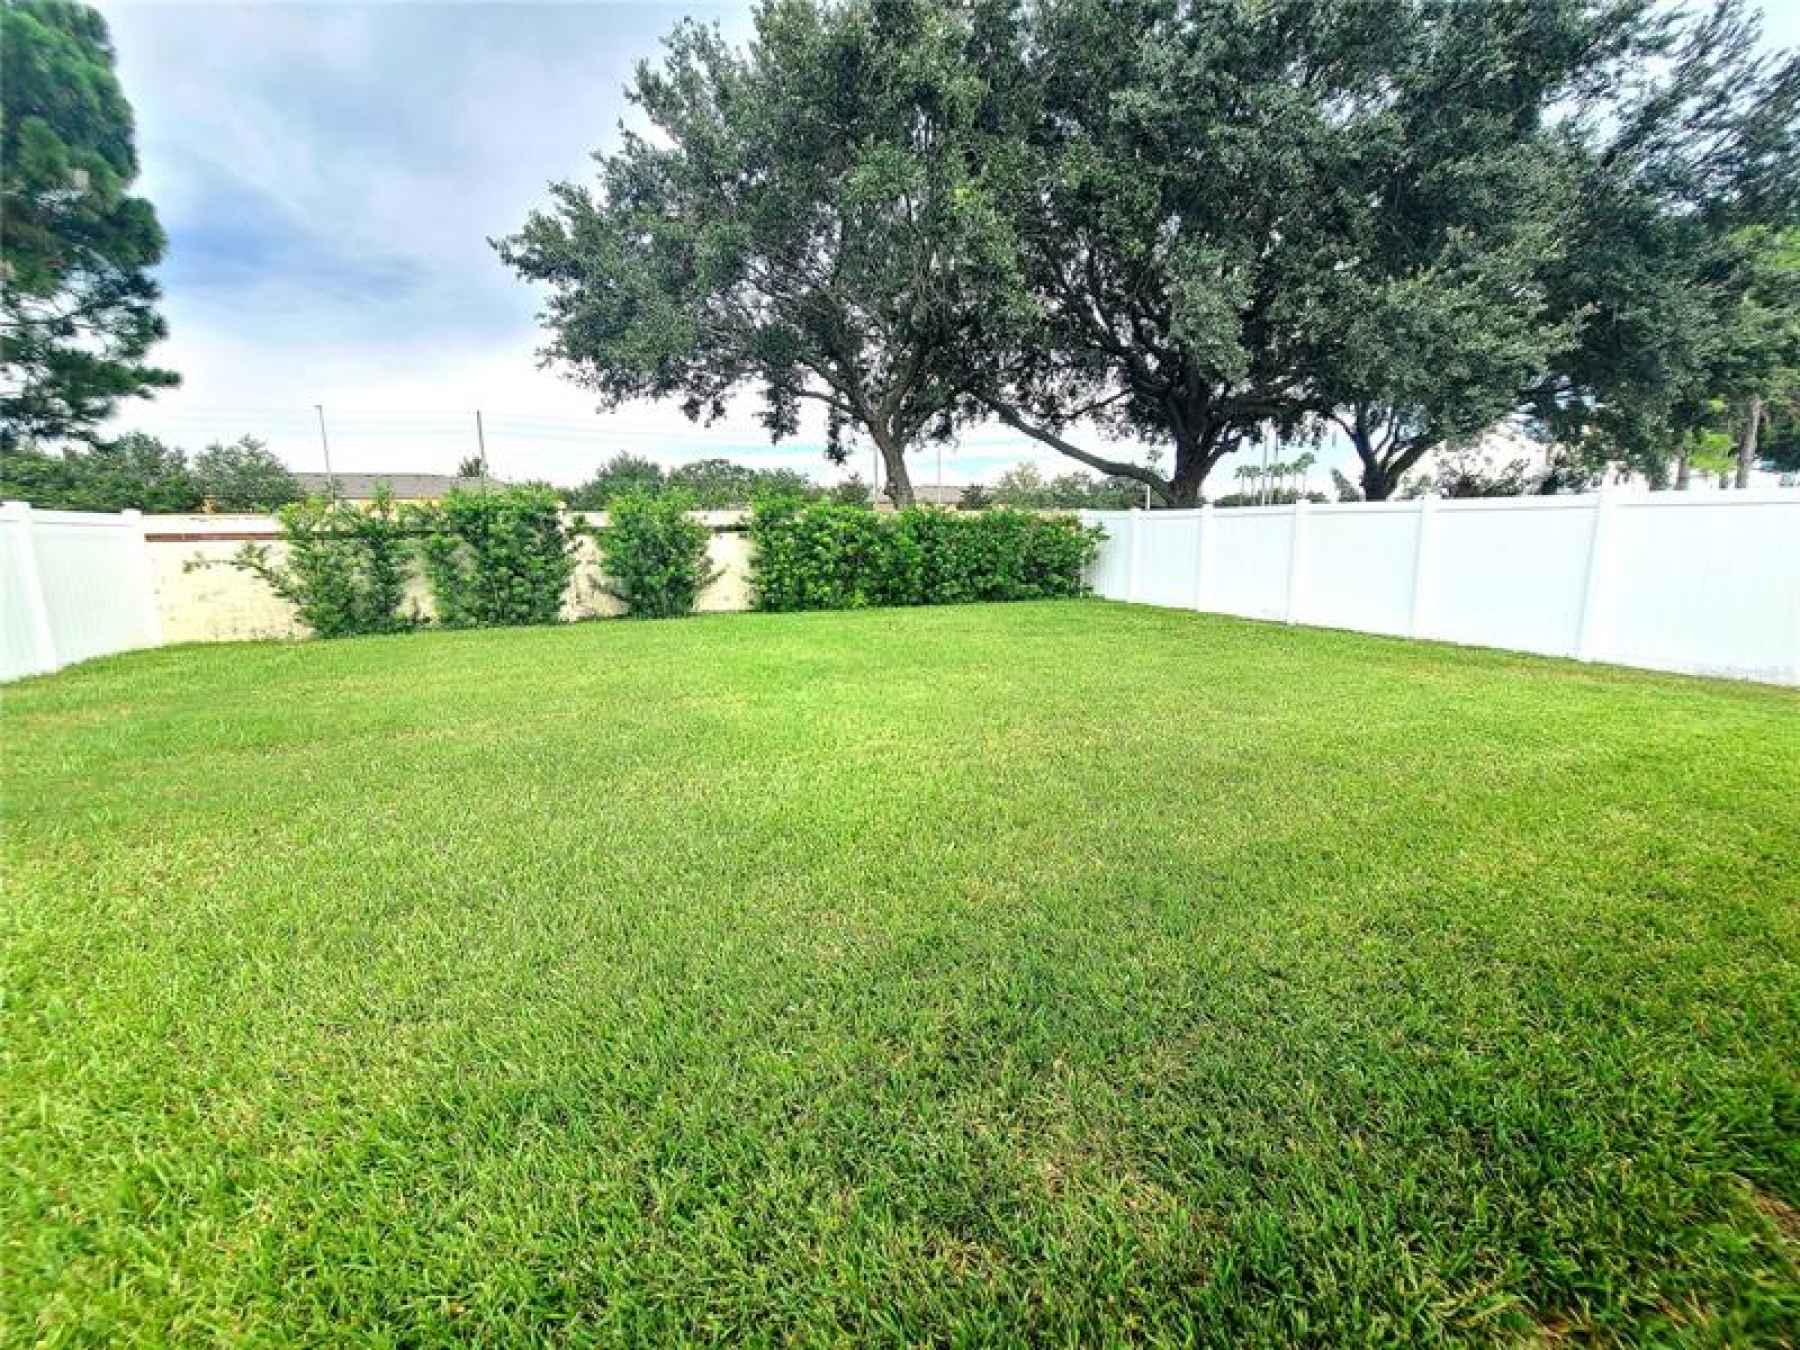 Huge & well maintained backyard, fully fenced